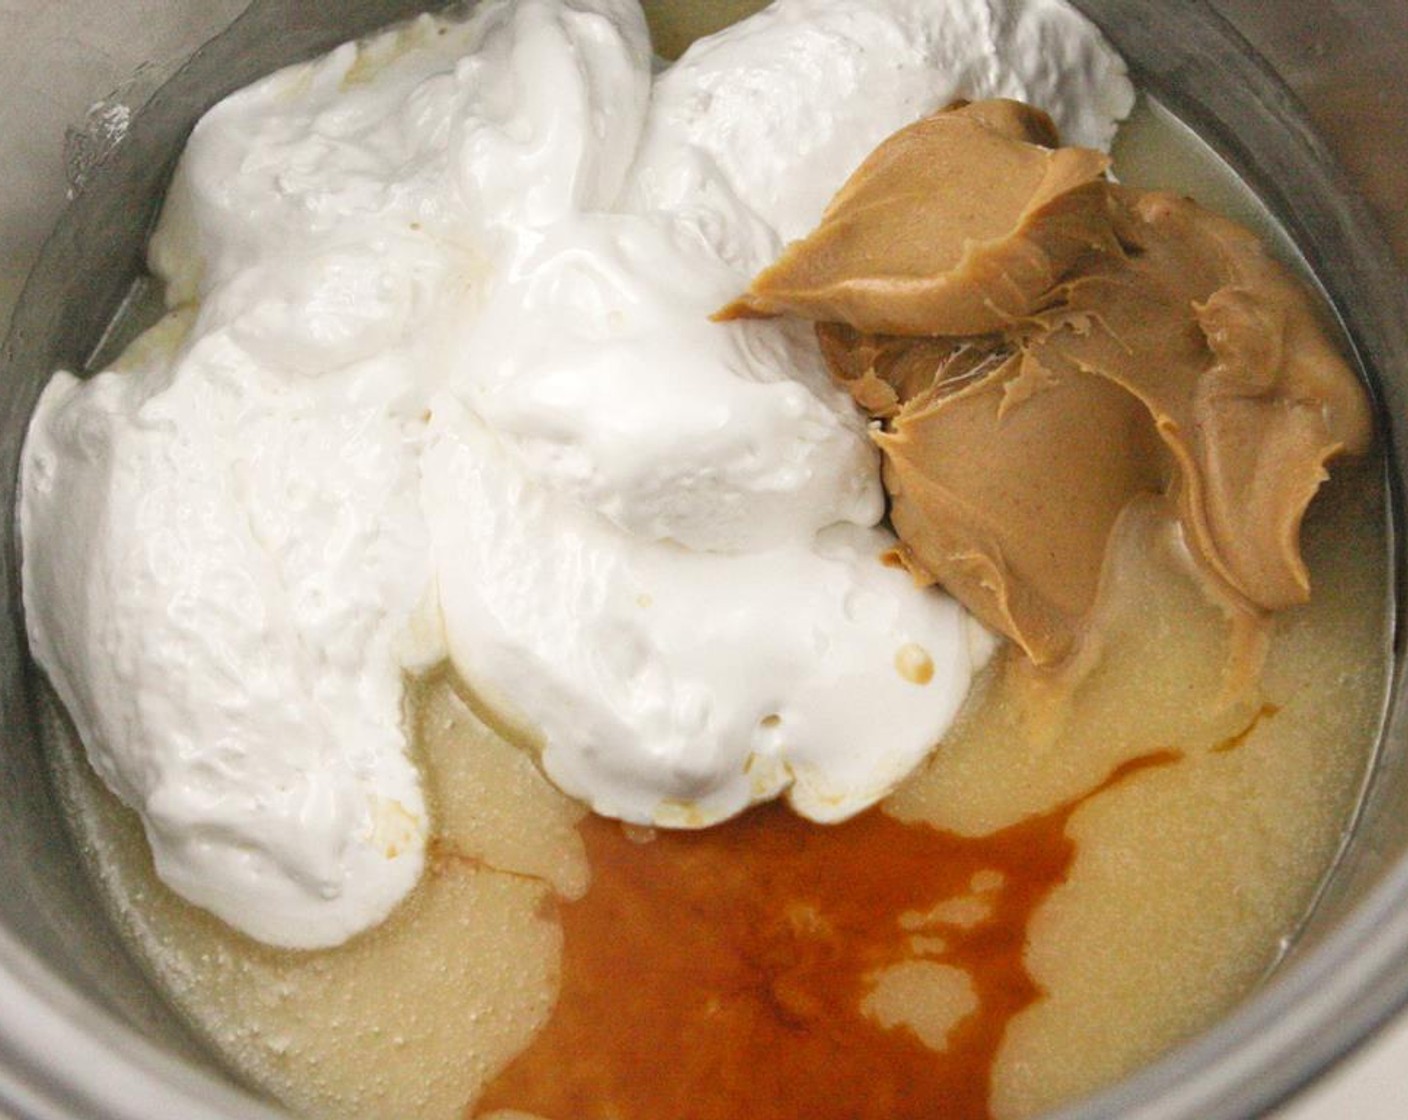 step 7 Remove from the heat and immediately stir in Marshmallow Creme (1 1/2 cups), Creamy Peanut Butter (1/4 cup), and Vanilla Extract (1 tsp).